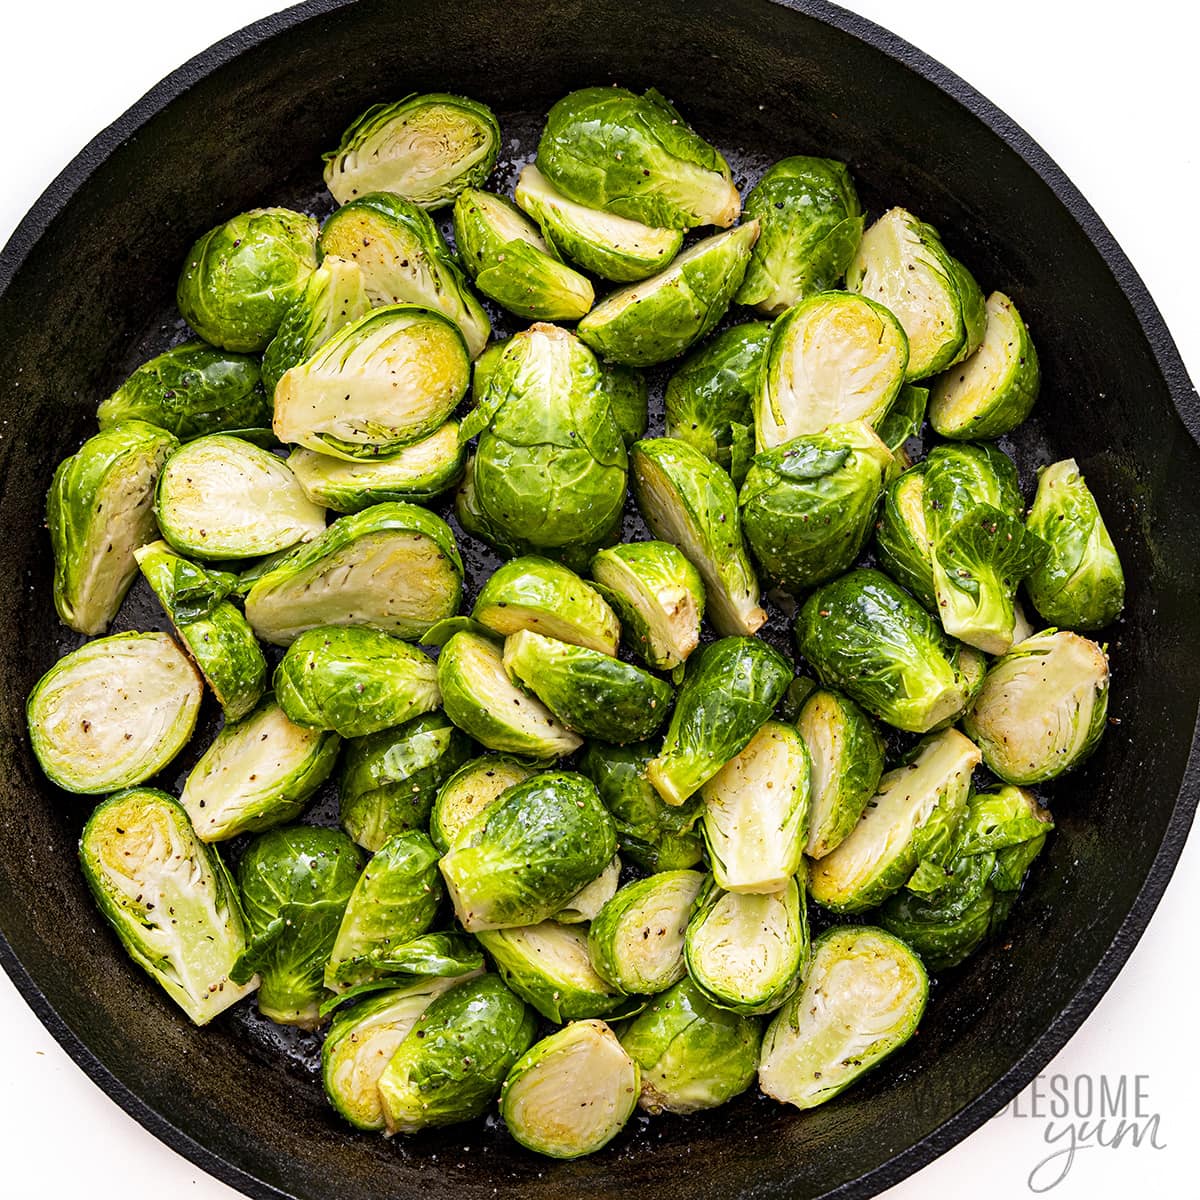 Season the Brussels sprouts in the skillet.